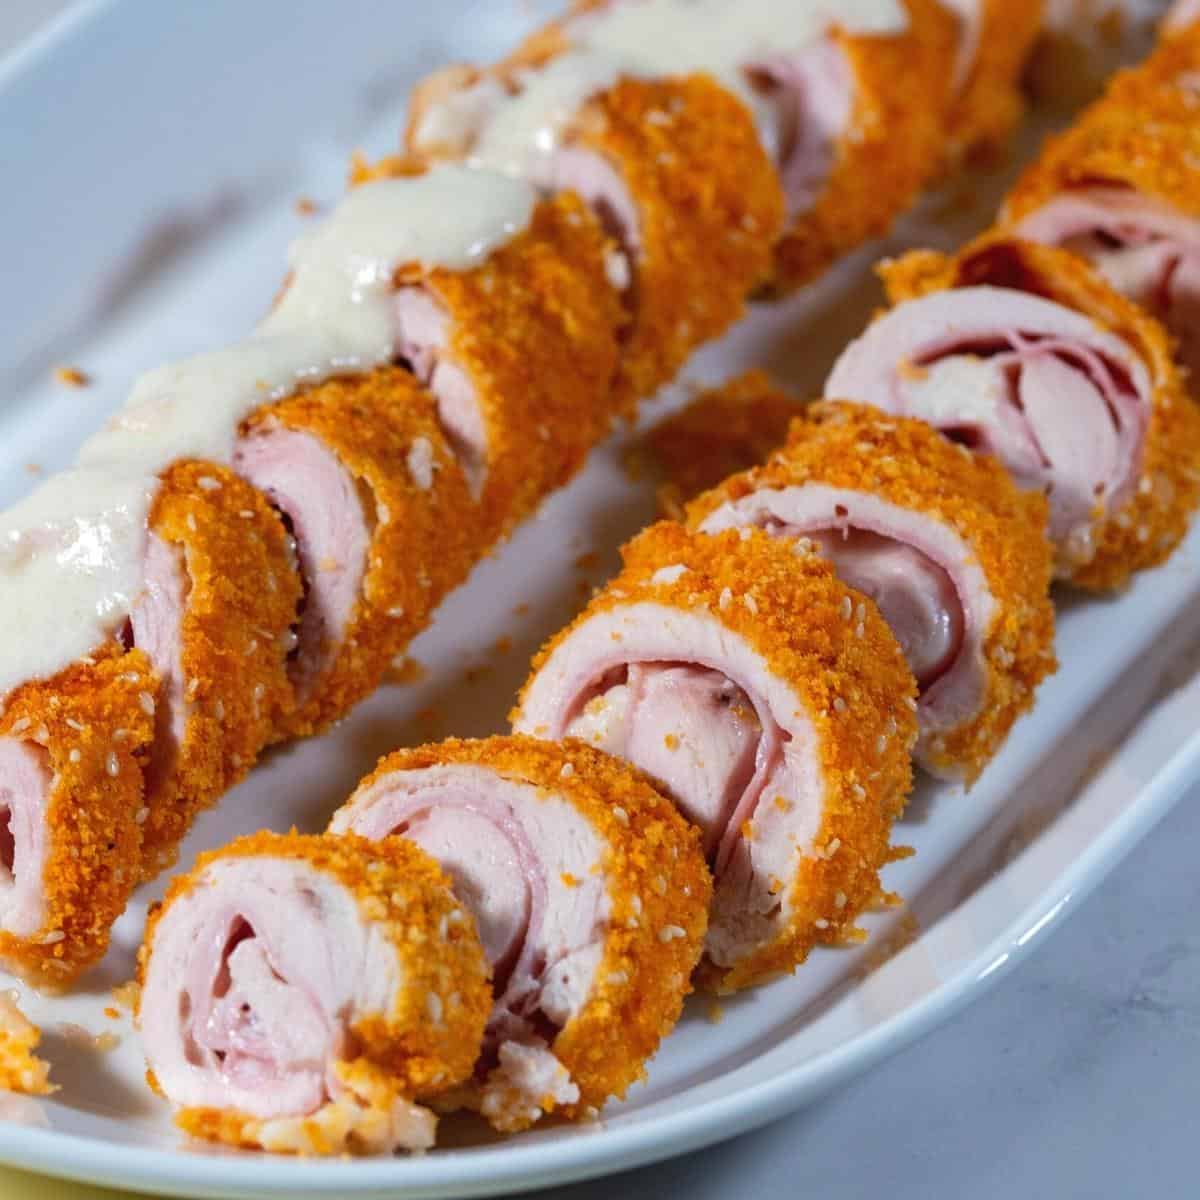 Sliced breaded chicken cordon blue with cheese sauce.